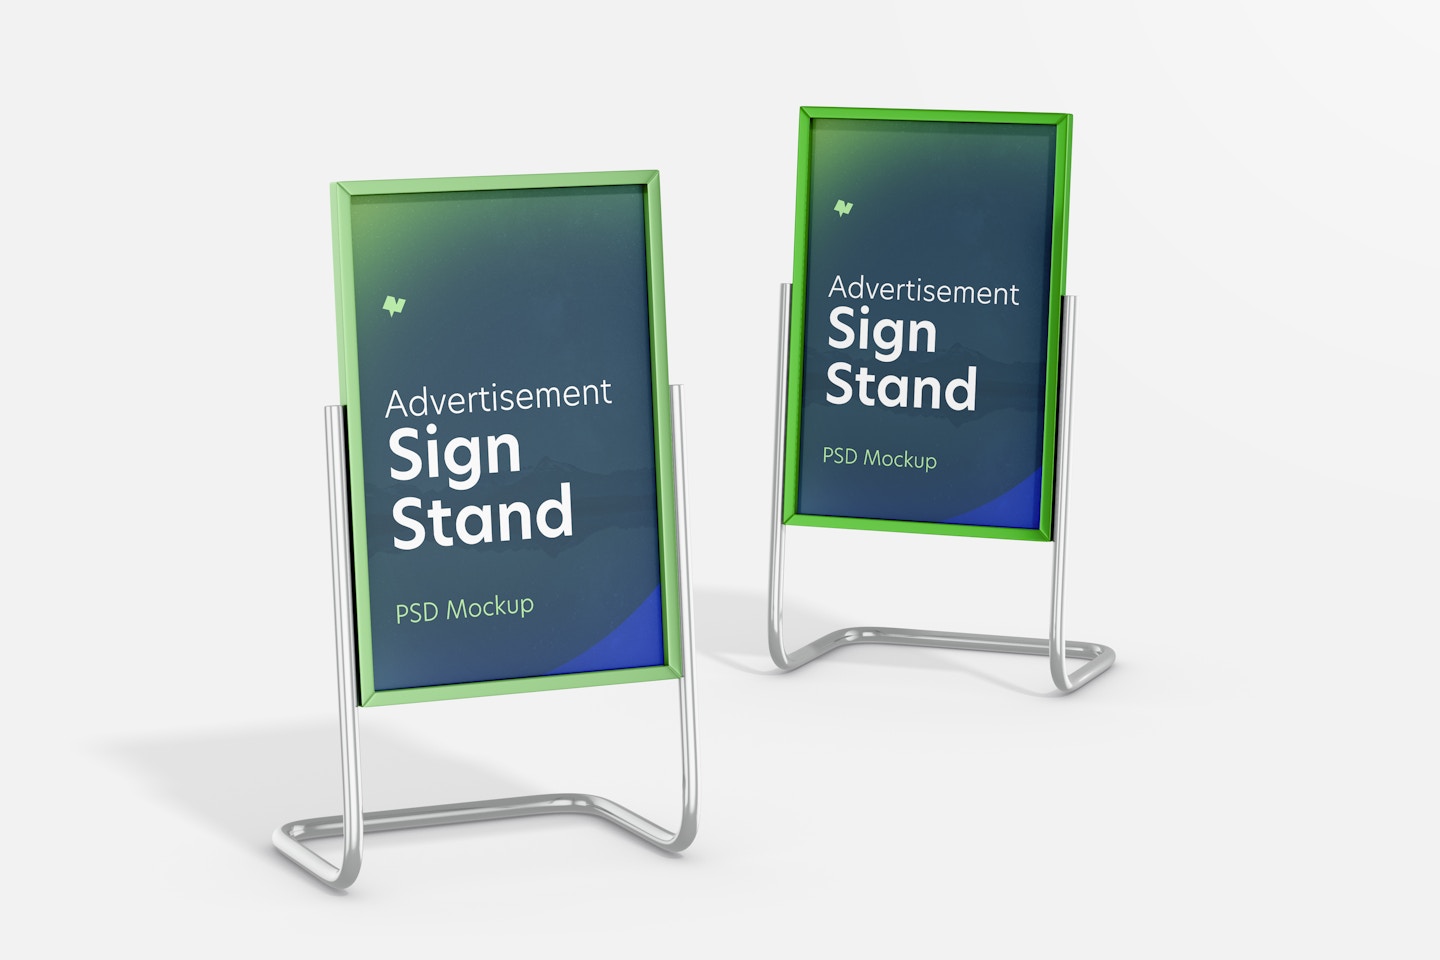 Advertisement Sign Stands Mockup, Front View